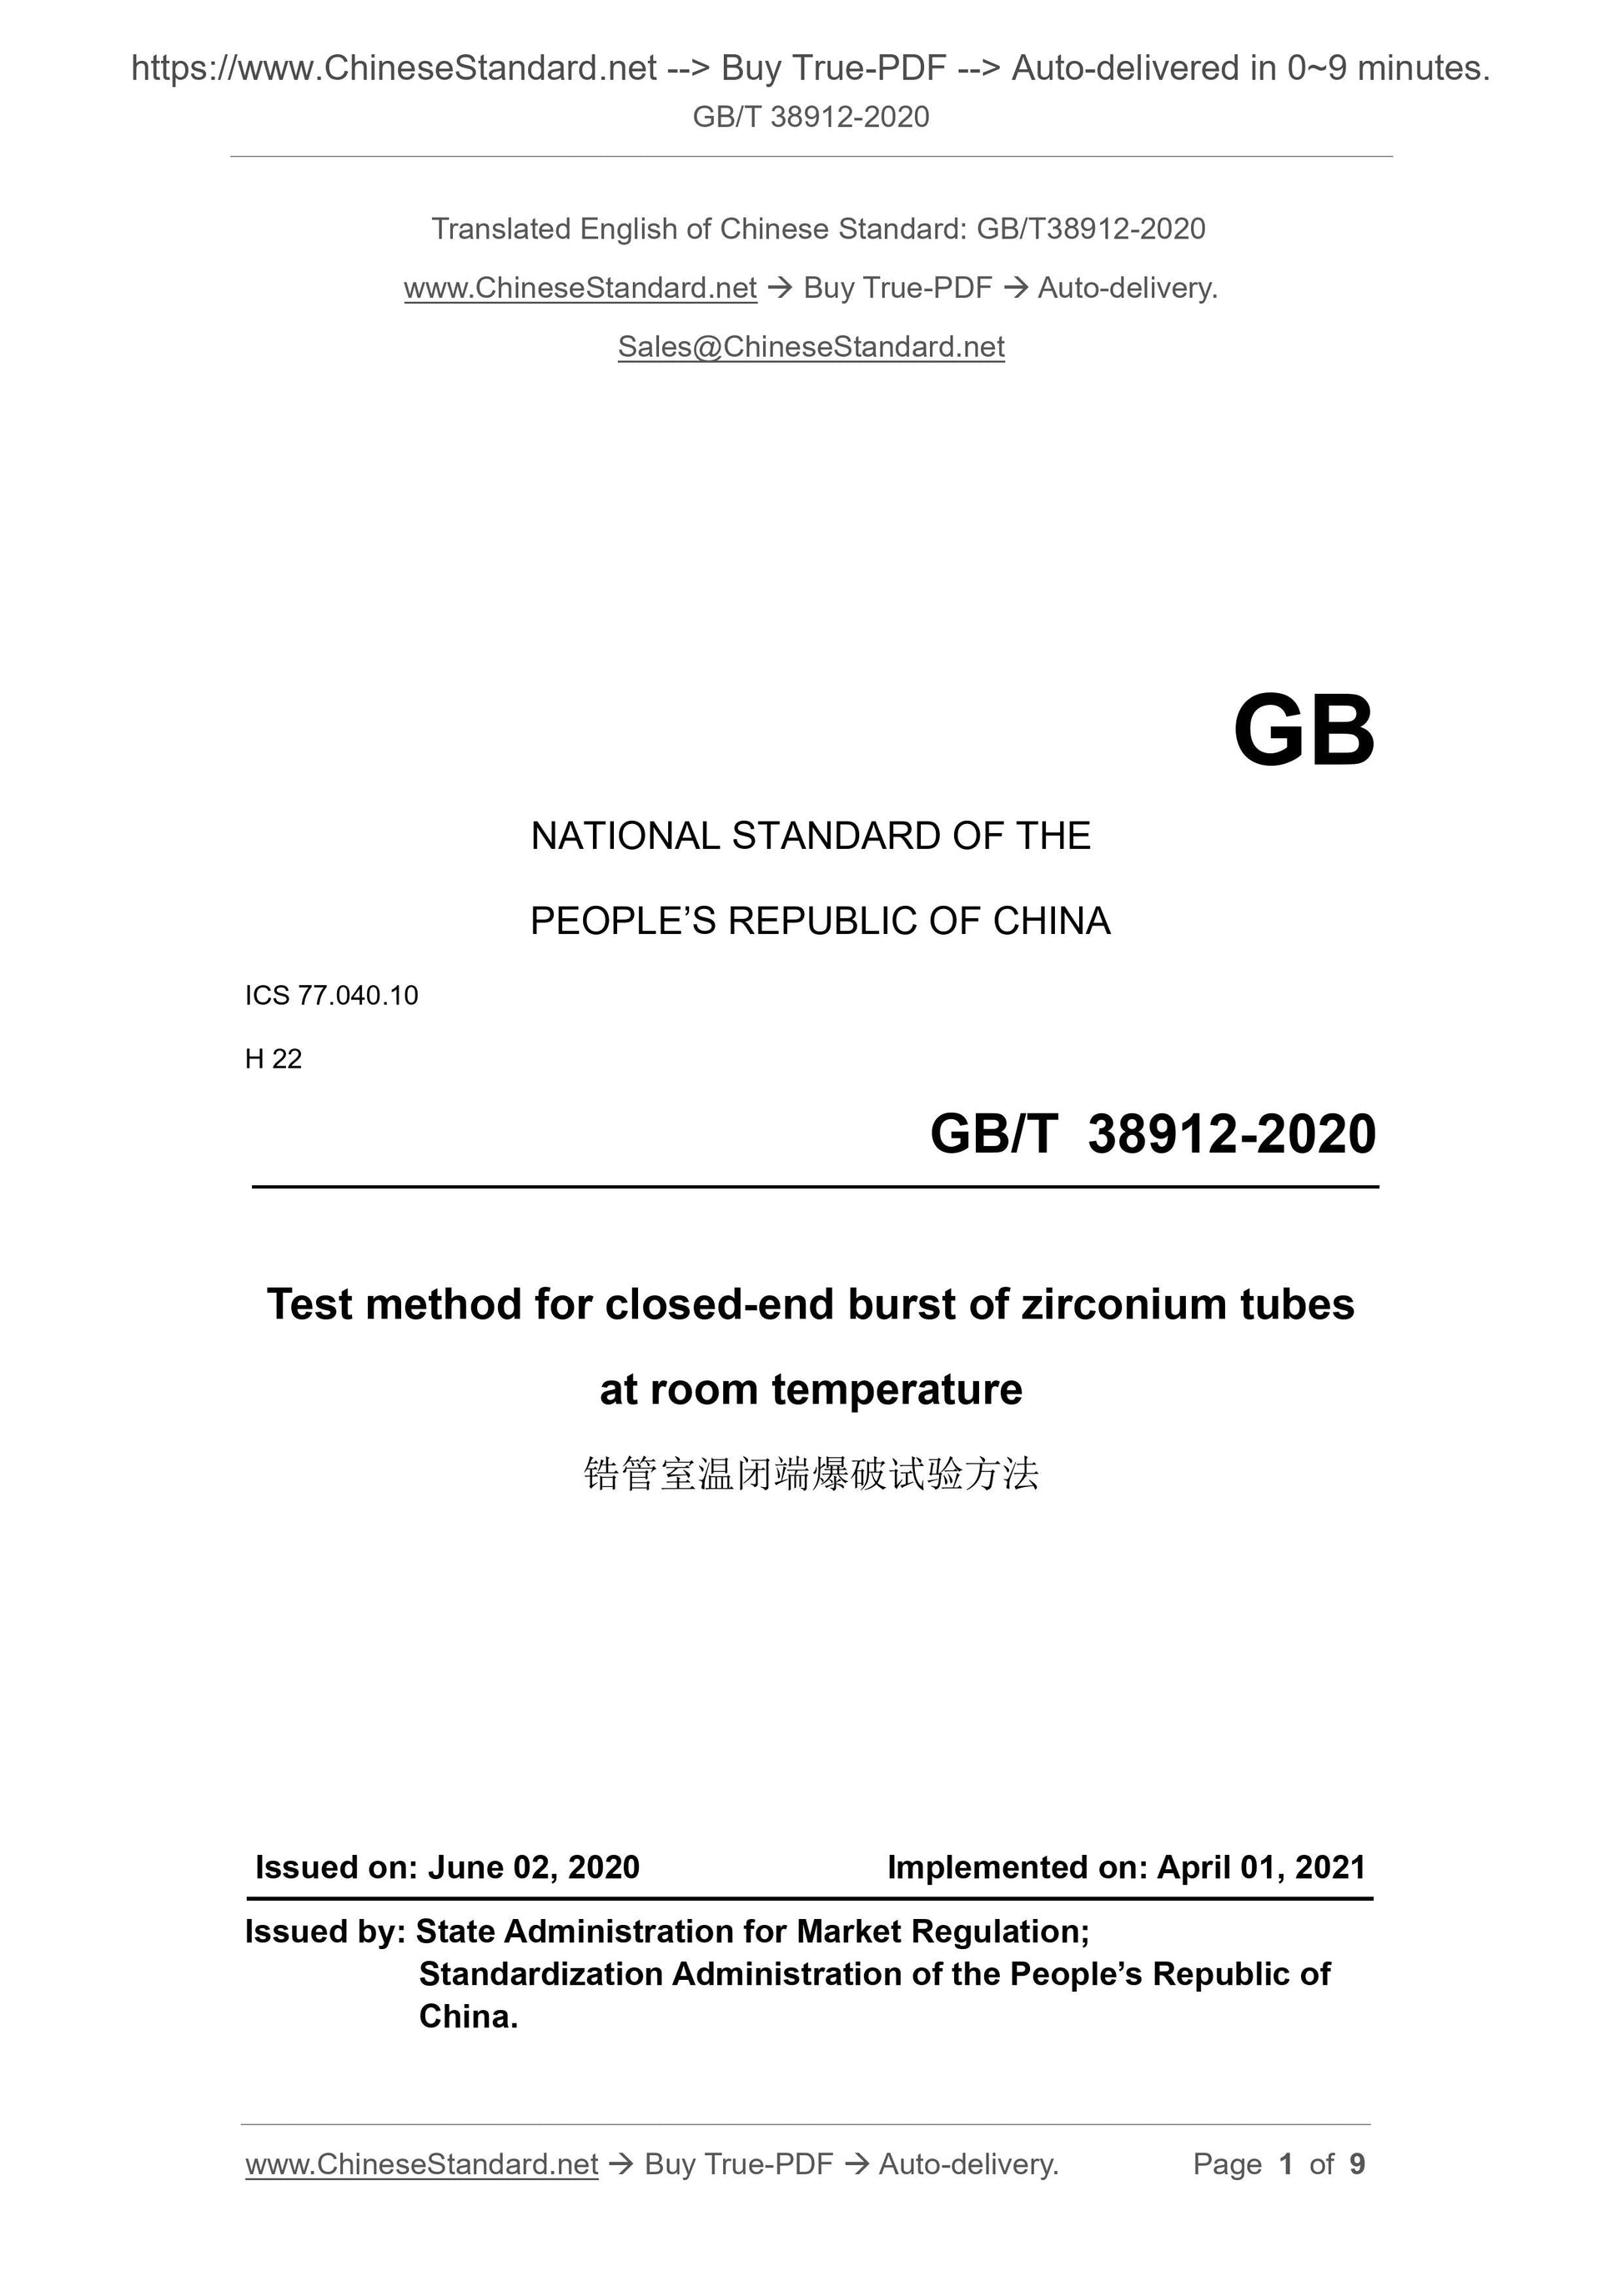 GB/T 38912-2020 Page 1